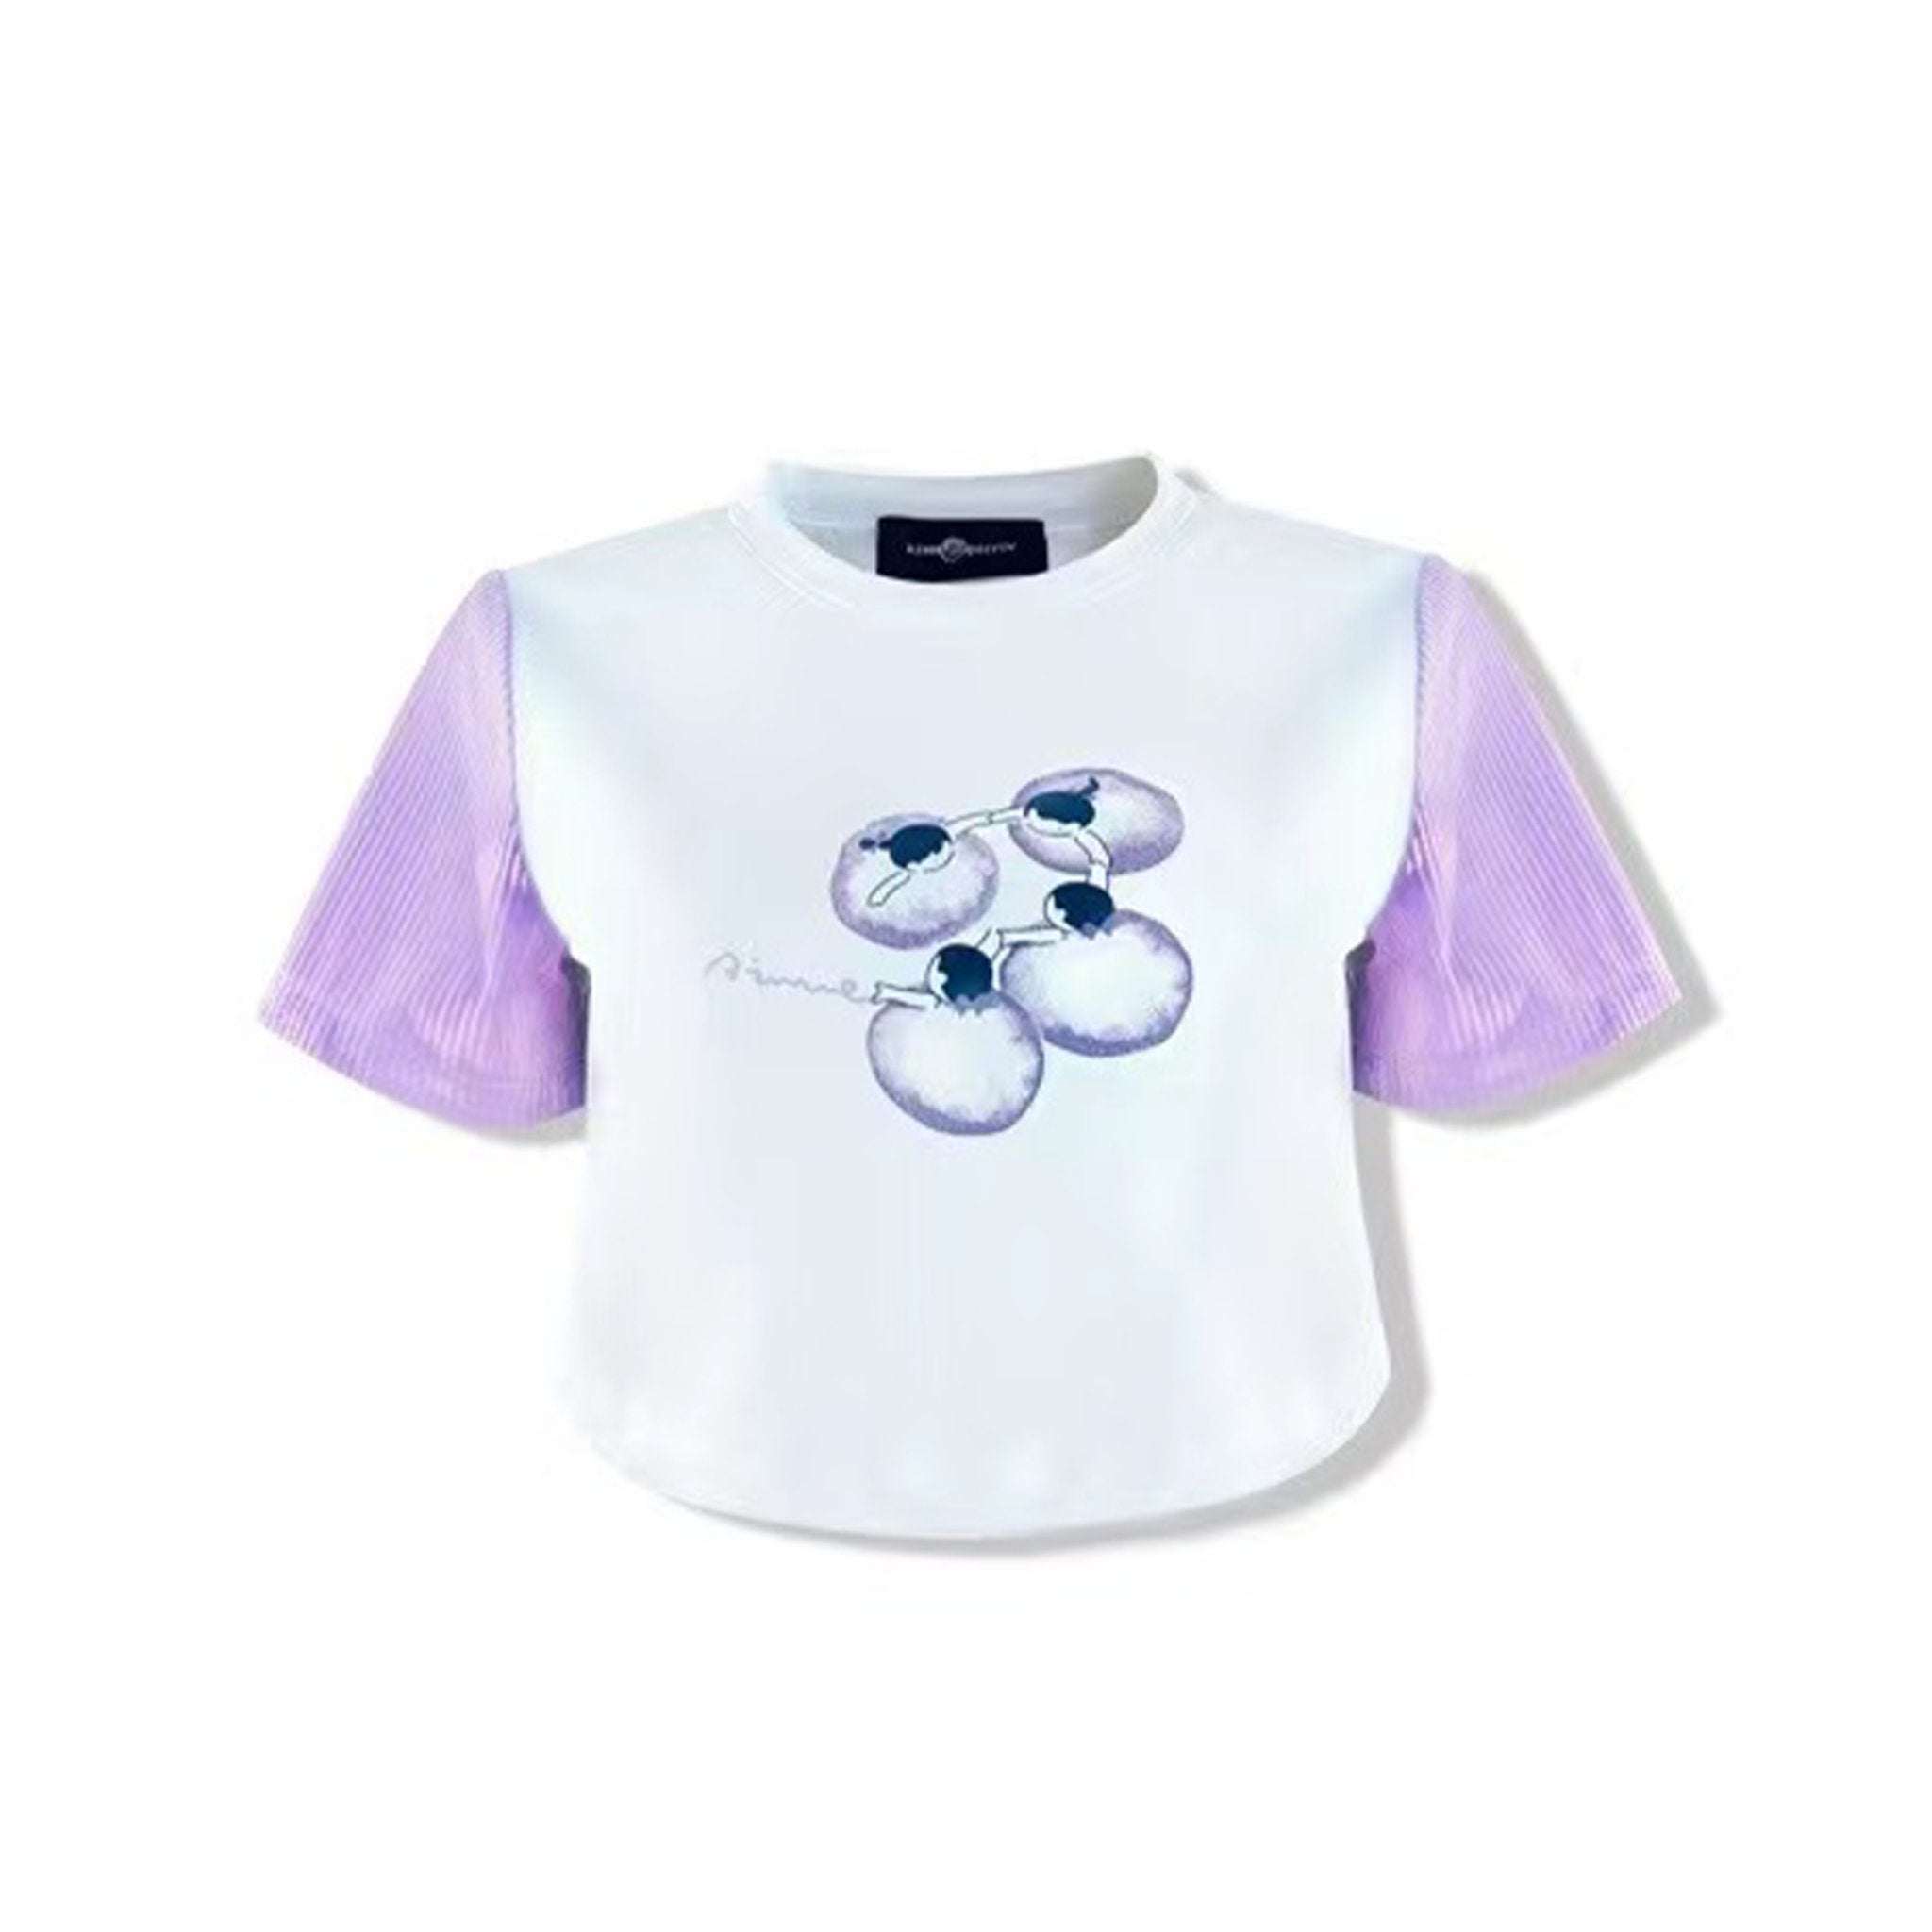 AIMME SPARROW Purple Cropped Top | MADA IN CHINA